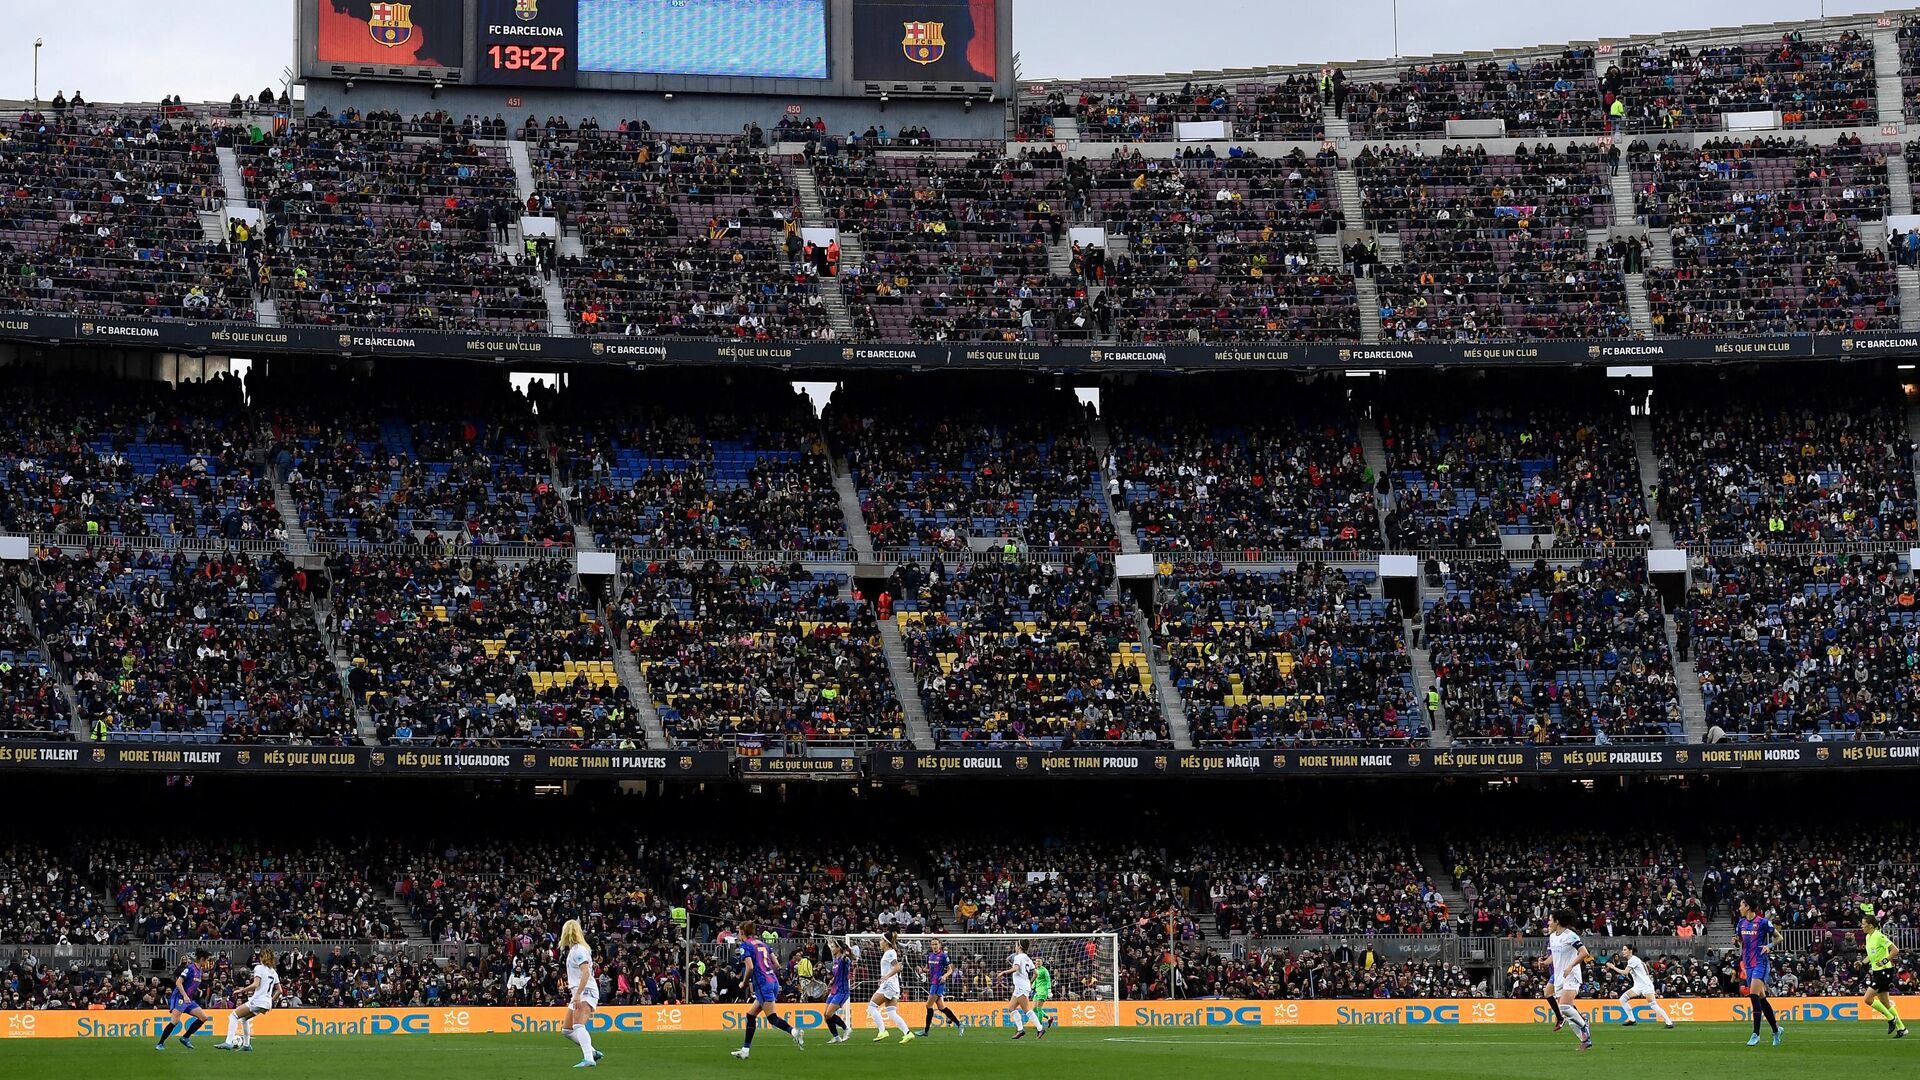 Players take part in the the women's UEFA Champions League quarter final second leg football match between FC Barcelona and Real Madrid CF at the Camp Nou stadium in Barcelona on March 30, 2022. (Photo by Josep LAGO / AFP) - РИА Новости, 1920, 30.03.2022